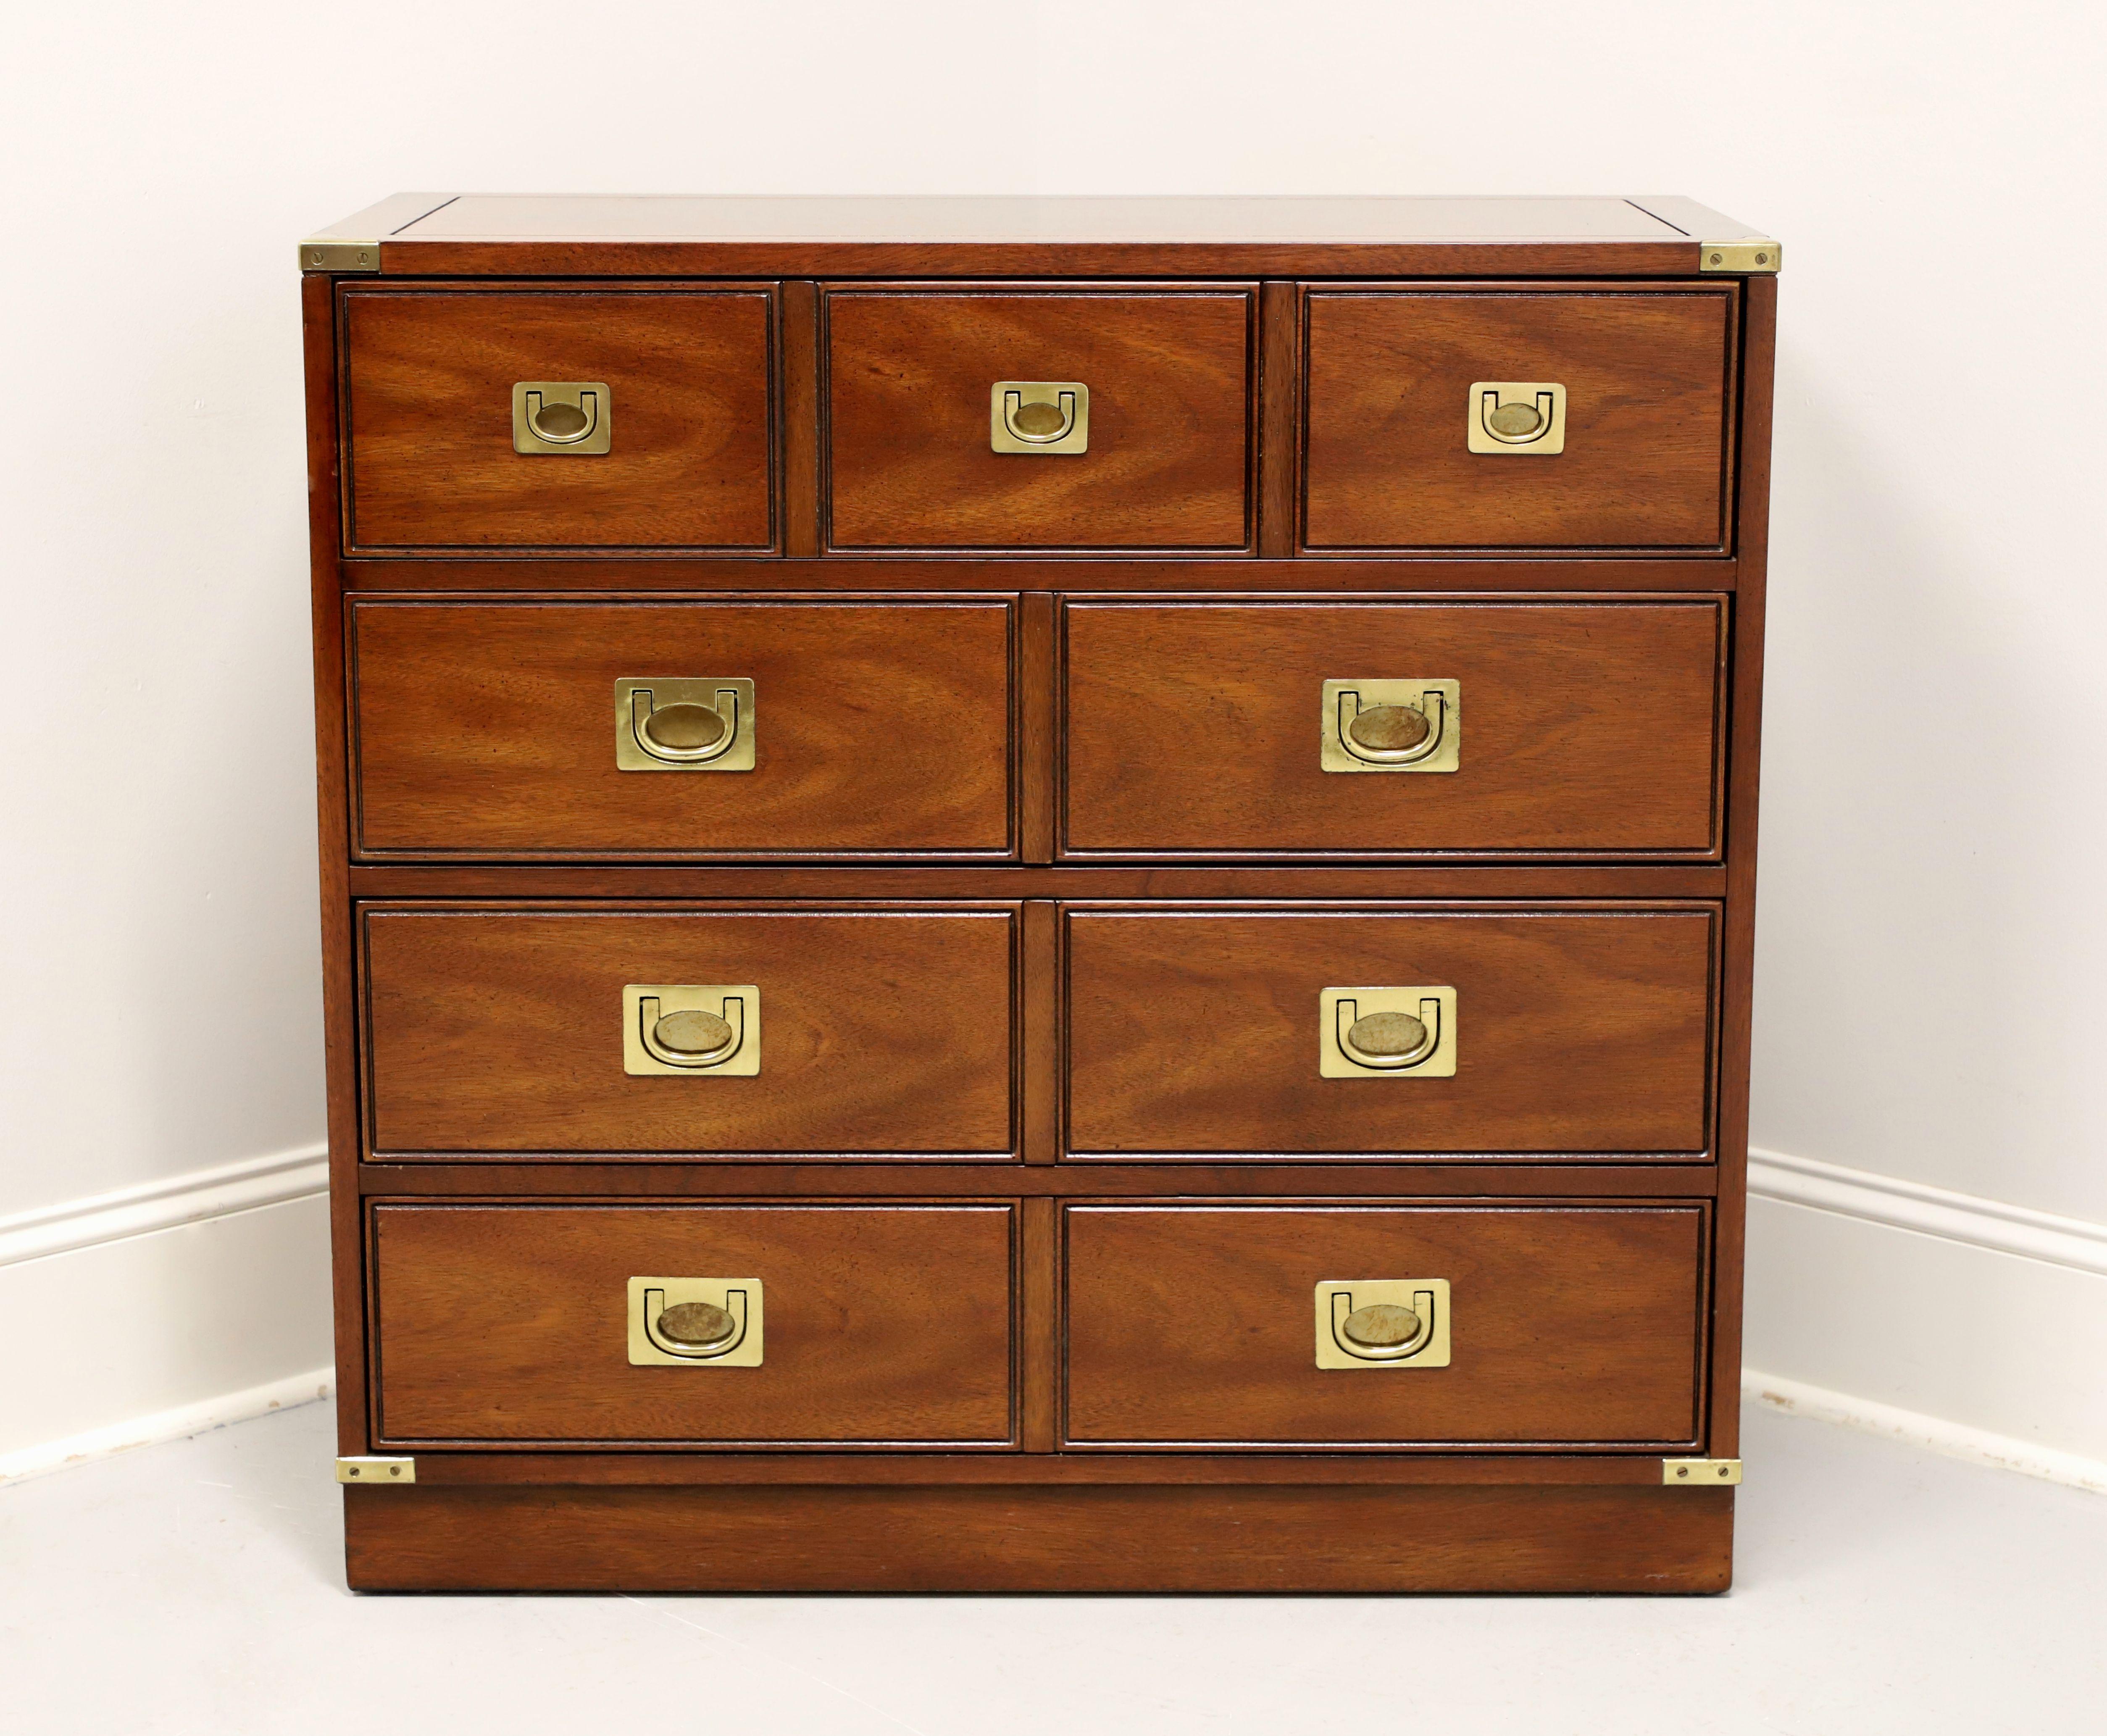 A campaign style bachelor chest by National Mount Airy Furniture, from their Lancer II Collection. Mahogany with banded flat edge top, brass hardware & accents, and a solid base. Features four drawers of dovetail construction with the faux look of